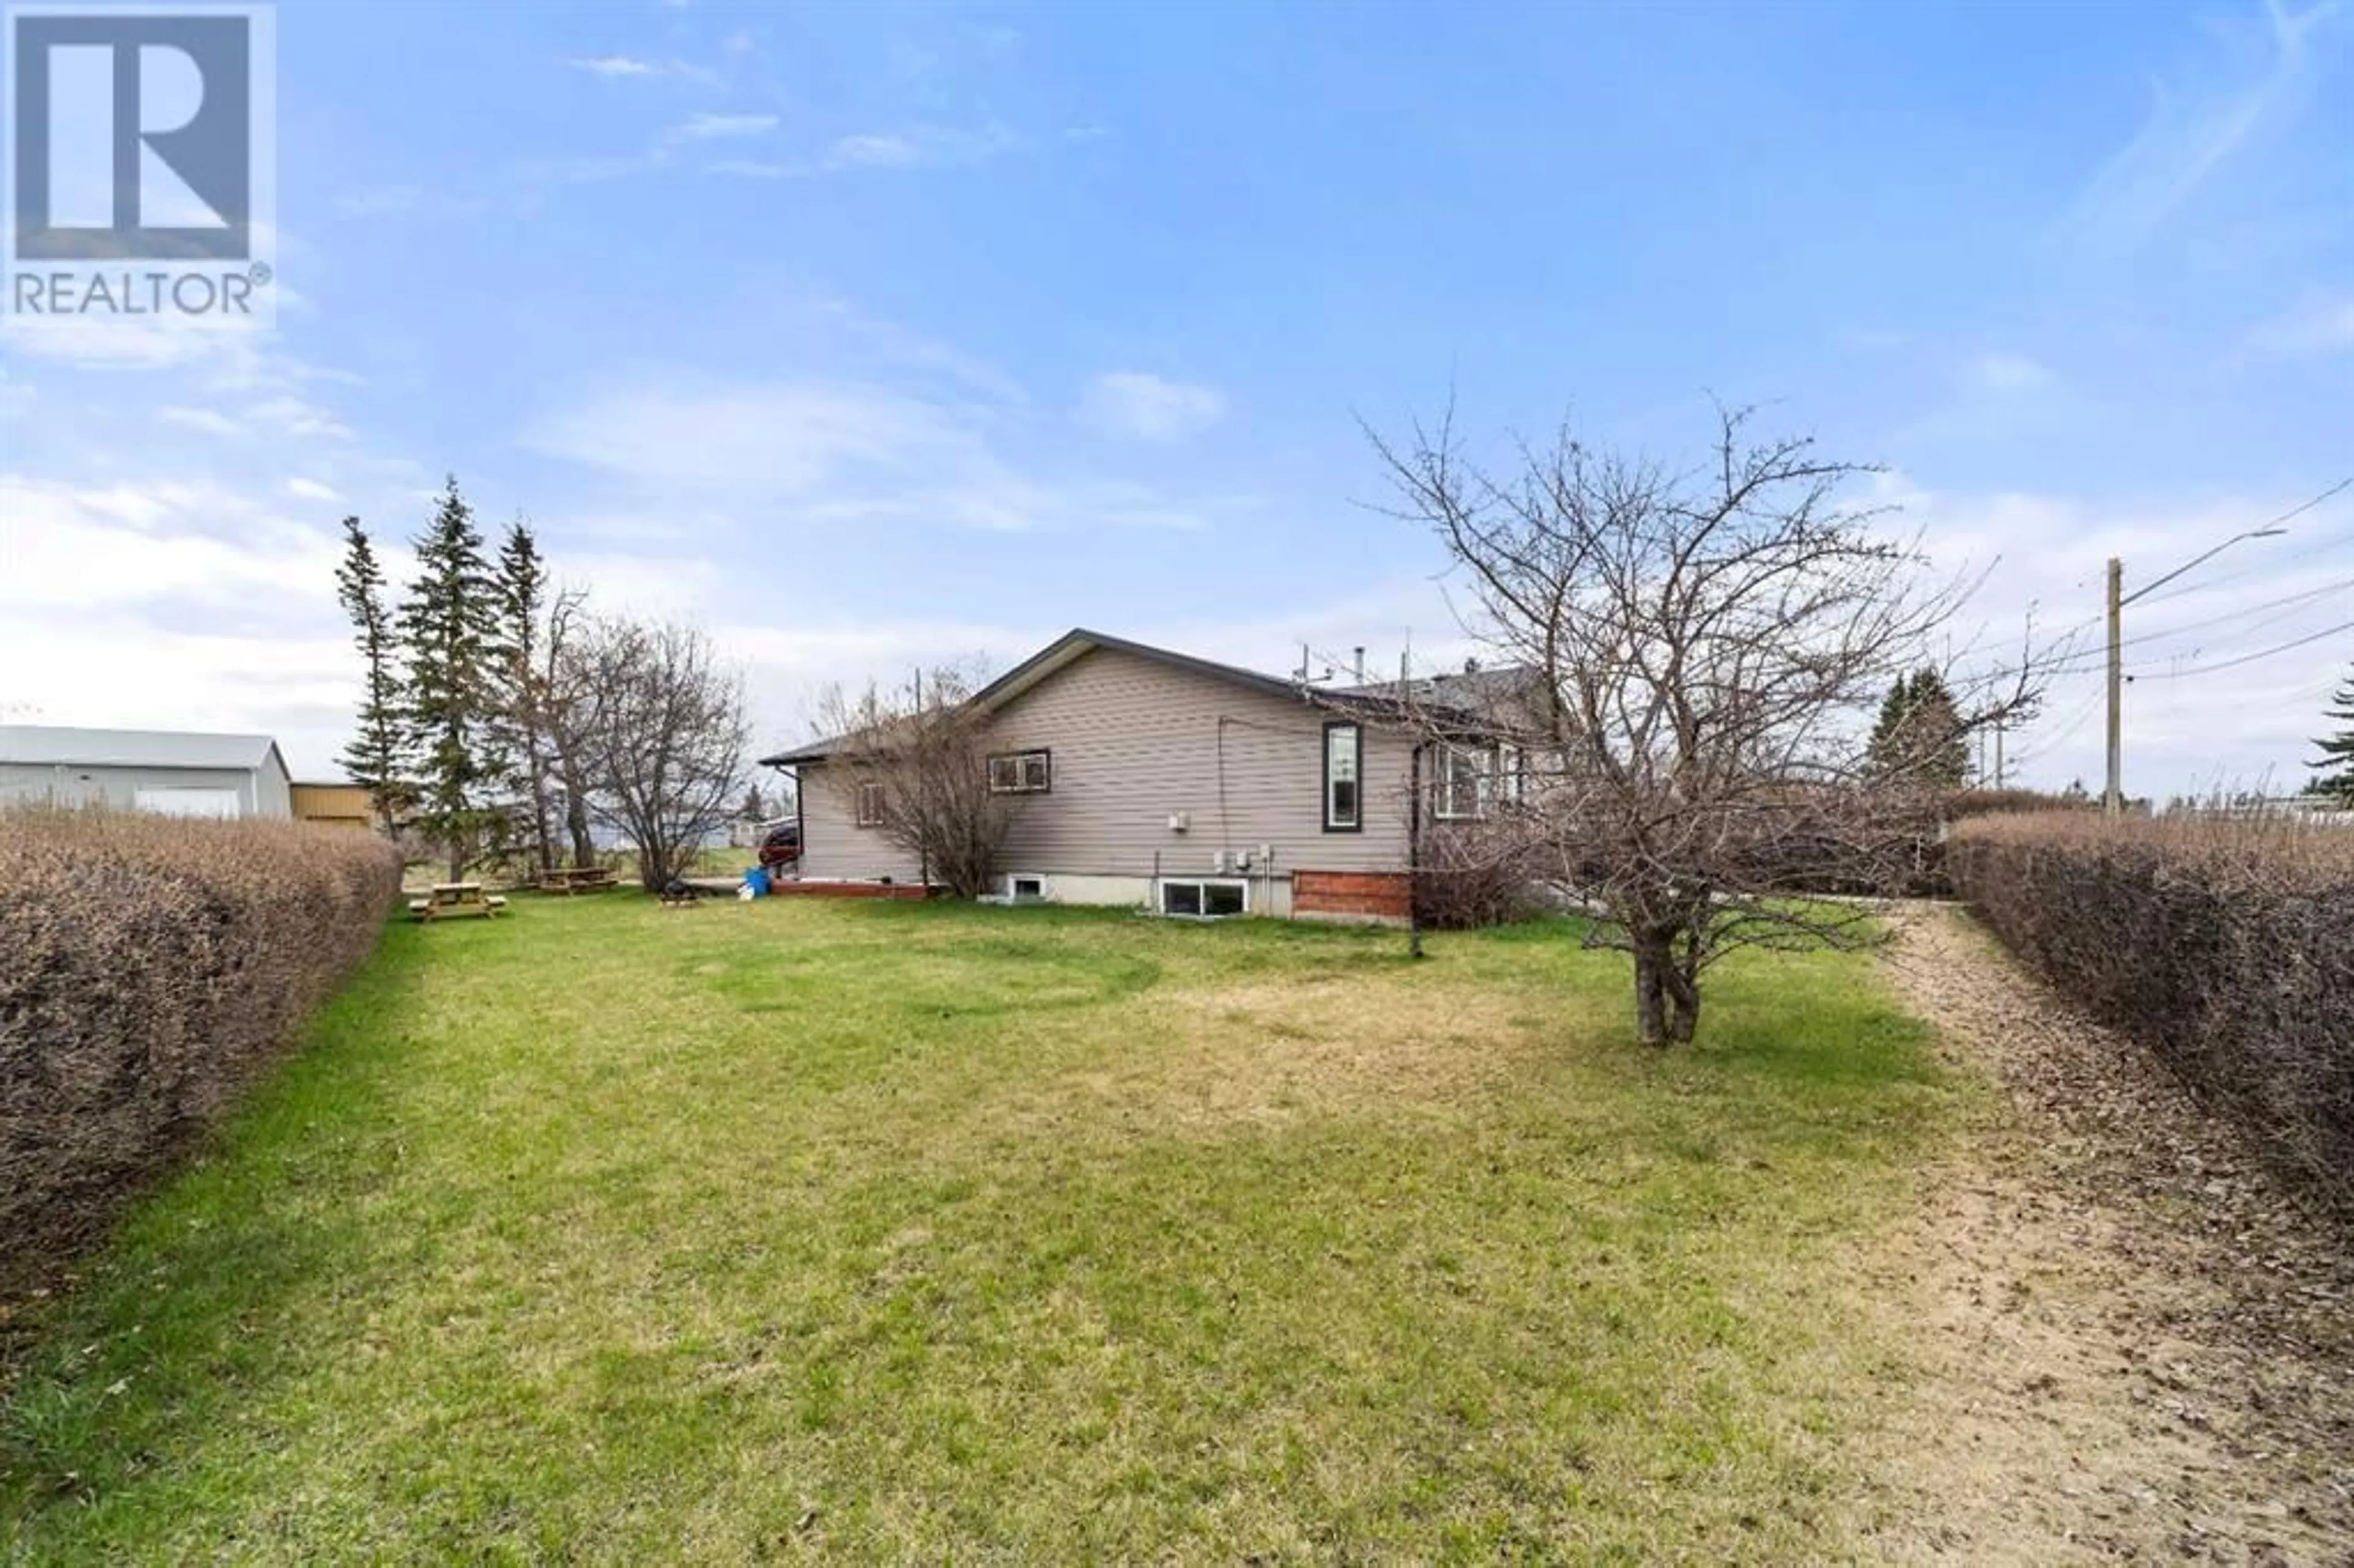 Fenced yard for 4830 54 Street, Olds Alberta T4H1G3